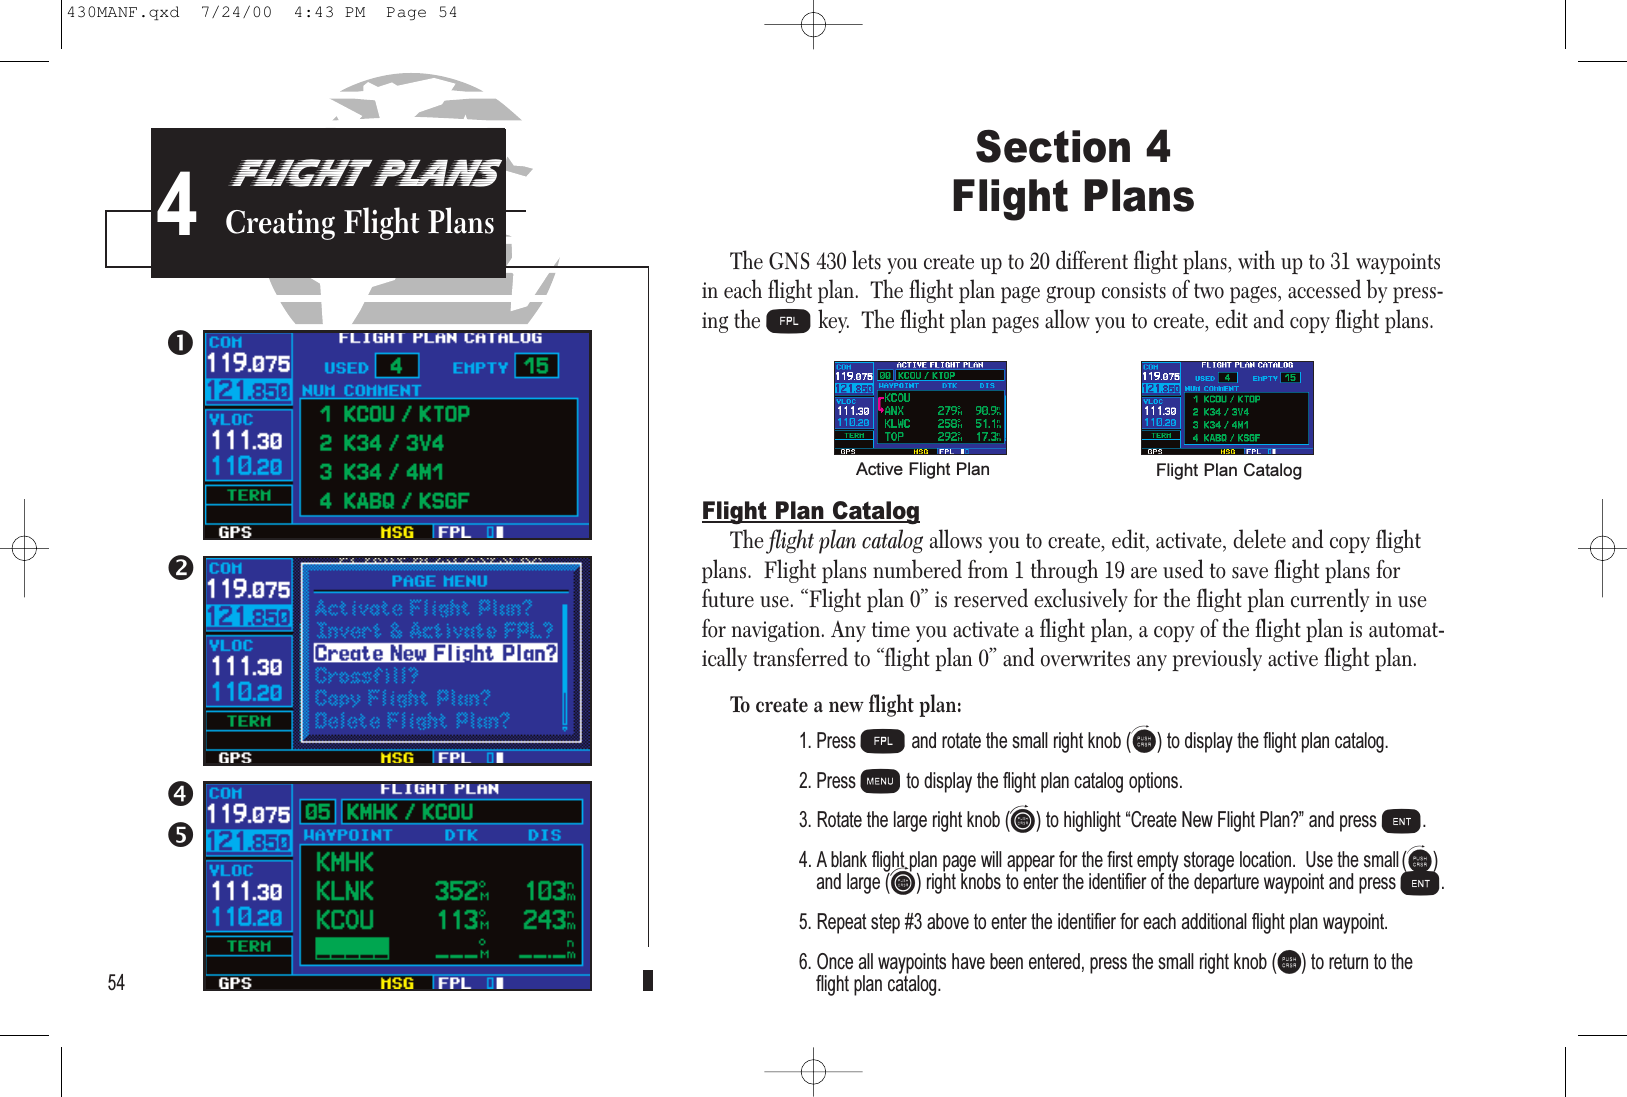 PROCEDURESApproach Examples5Section 4 Flight PlansThe GNS 430 lets you create up to 20 different flight plans, with up to 31 waypointsin each flight plan.  The flight plan page group consists of two pages, accessed by press-ing theFkey.  The flight plan pages allow you to create, edit and copy flight plans.Flight Plan CatalogThe flight plan catalog allows you to create, edit, activate, delete and copy flightplans.  Flight plans numbered from 1 through 19 are used to save flight plans forfuture use. “Flight plan 0” is reserved exclusively for the flight plan currently in usefor navigation. Any time you activate a flight plan, a copy of the flight plan is automat-ically transferred to “flight plan 0” and overwrites any previously active flight plan.To create a new flight plan:1. Press Fand rotate the small right knob (a) to display the flight plan catalog.2. Press mto display the flight plan catalog options.3. Rotate the large right knob (d) to highlight Create New Flight Plan? and press E.4. A blank flight plan page will appear for the first empty storage location.  Use the small(a)and large(d) right knobs to enter the identifier of the departure waypoint and pressE.5. Repeat step #3 above to enter the identifier for each additional flight plan waypoint.6. Once all waypoints have been entered, press the small right knob (r) to return to theflight plan catalog.54FLIGHT PLANSCreating Flight PlansActive Flight Plan Flight Plan Catalog4430MANF.qxd  7/24/00  4:43 PM  Page 54